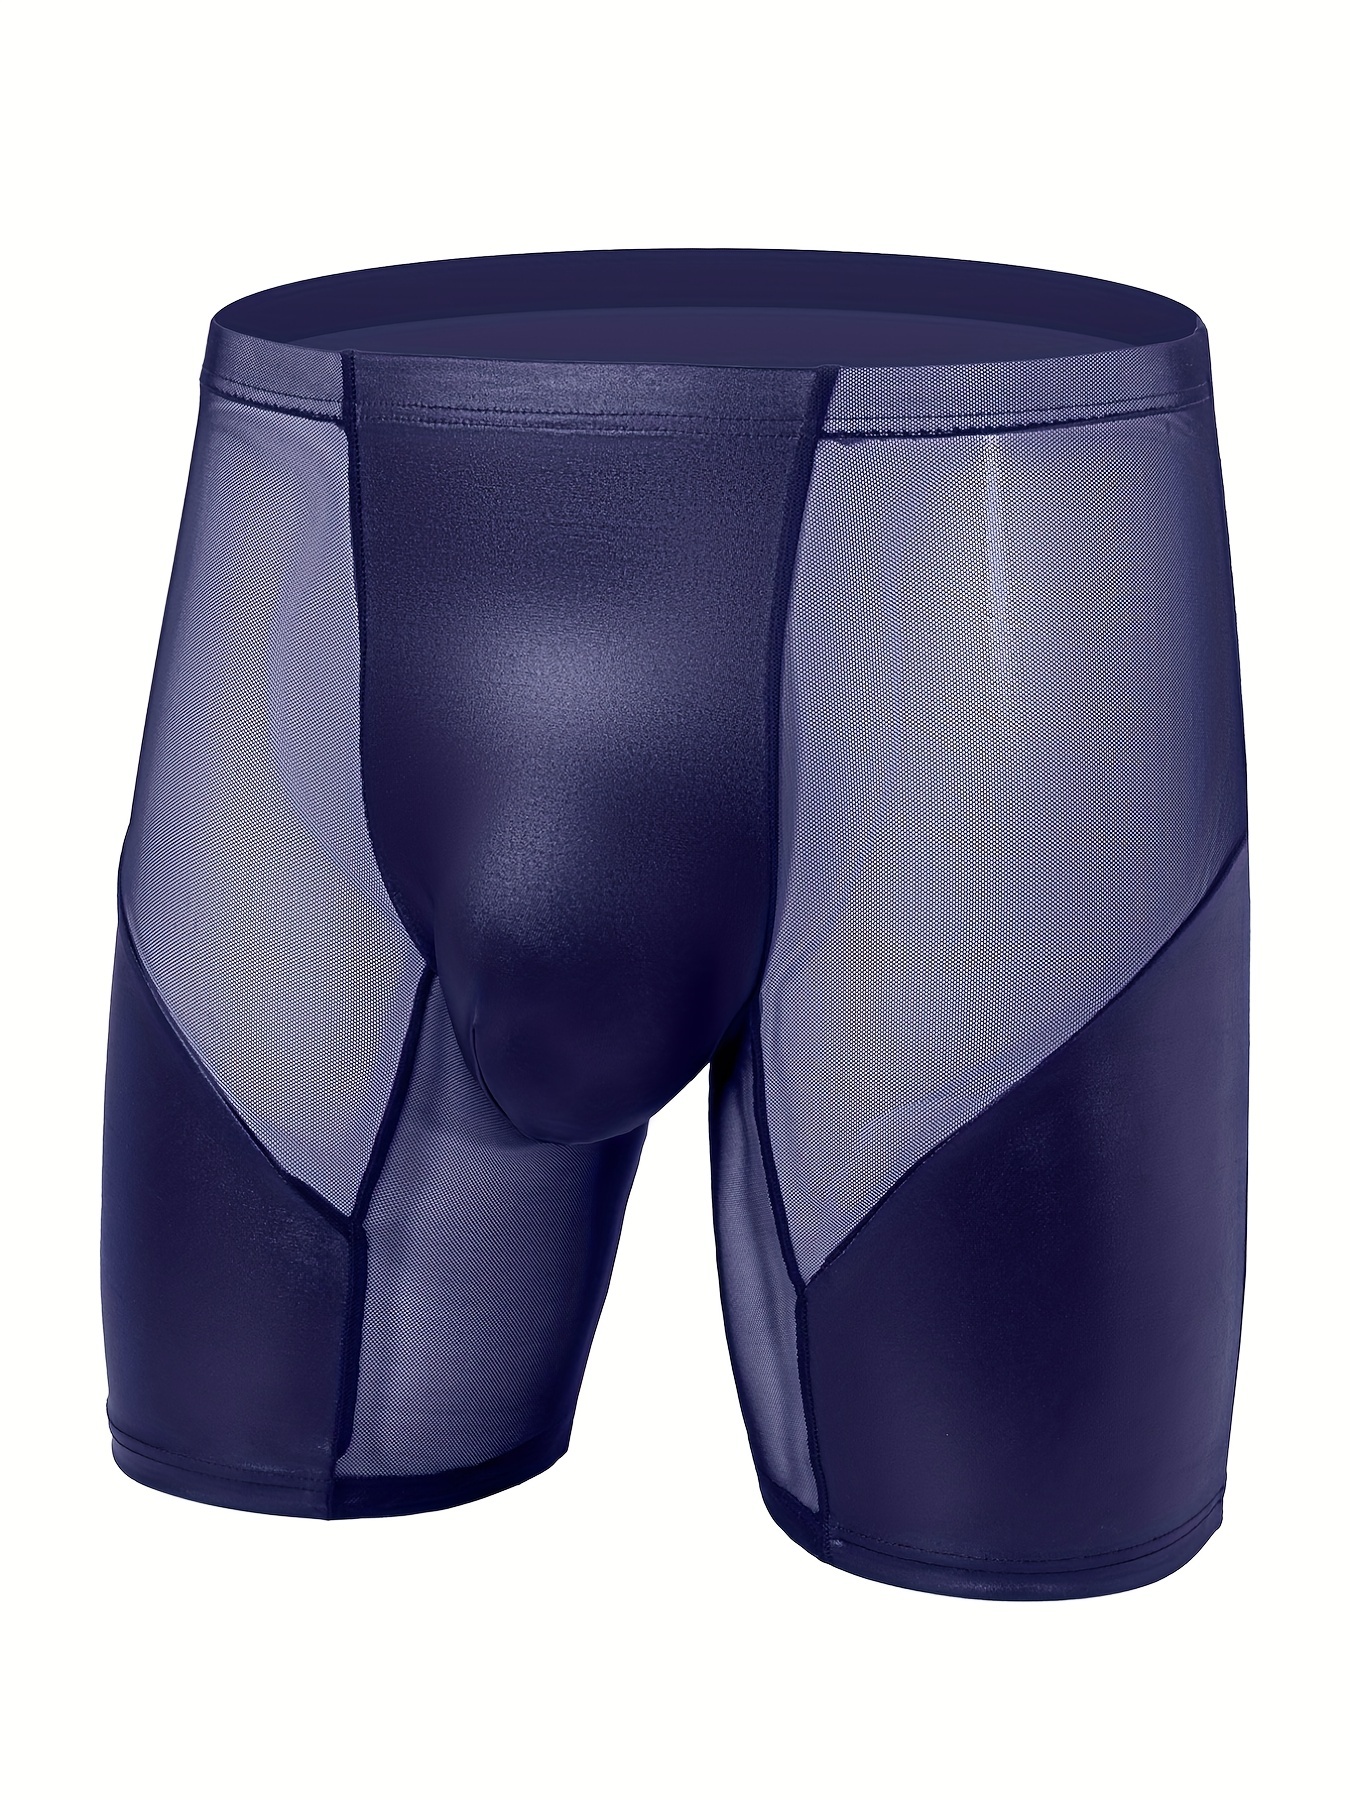 AO Element Sports Elephant Nose Trunks - How it works - Wearviews -  Underwear Review 